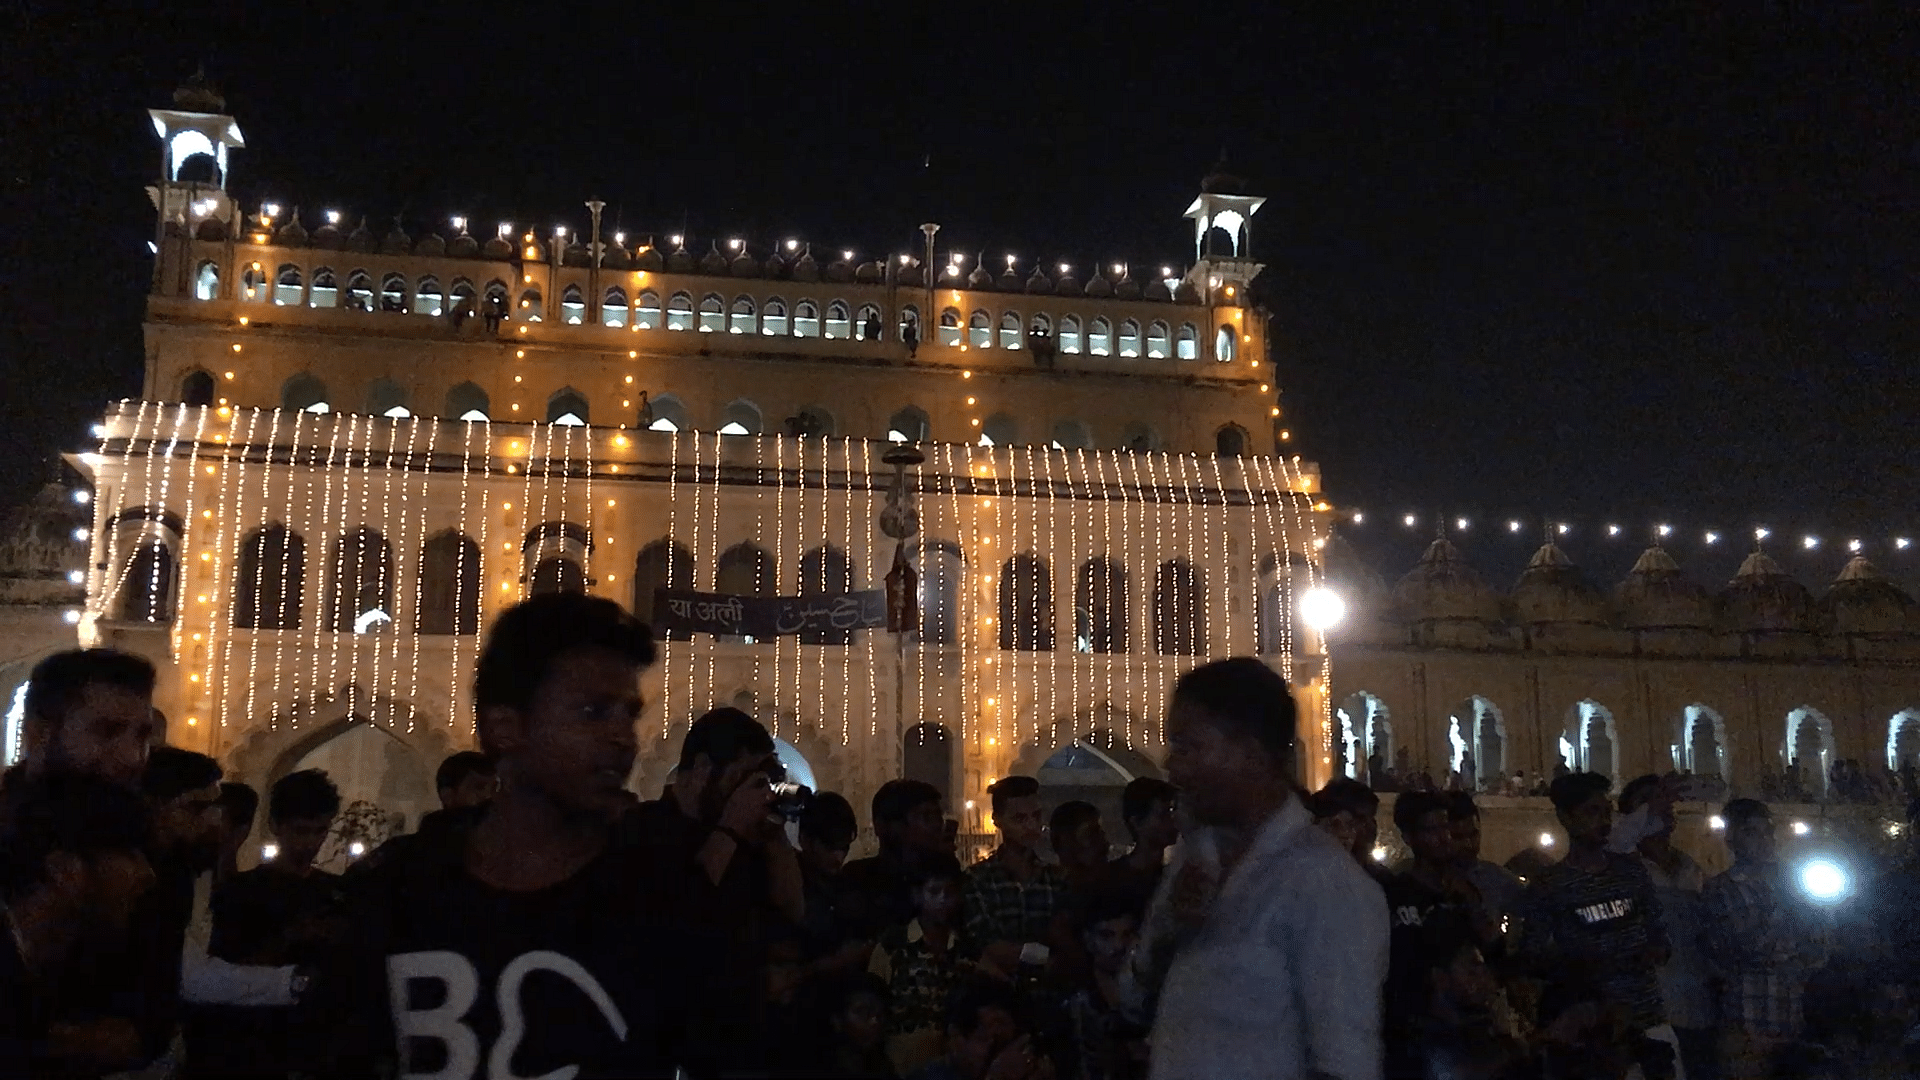 The Imambada in Lucknow is decked up for the occasion of Muharram.